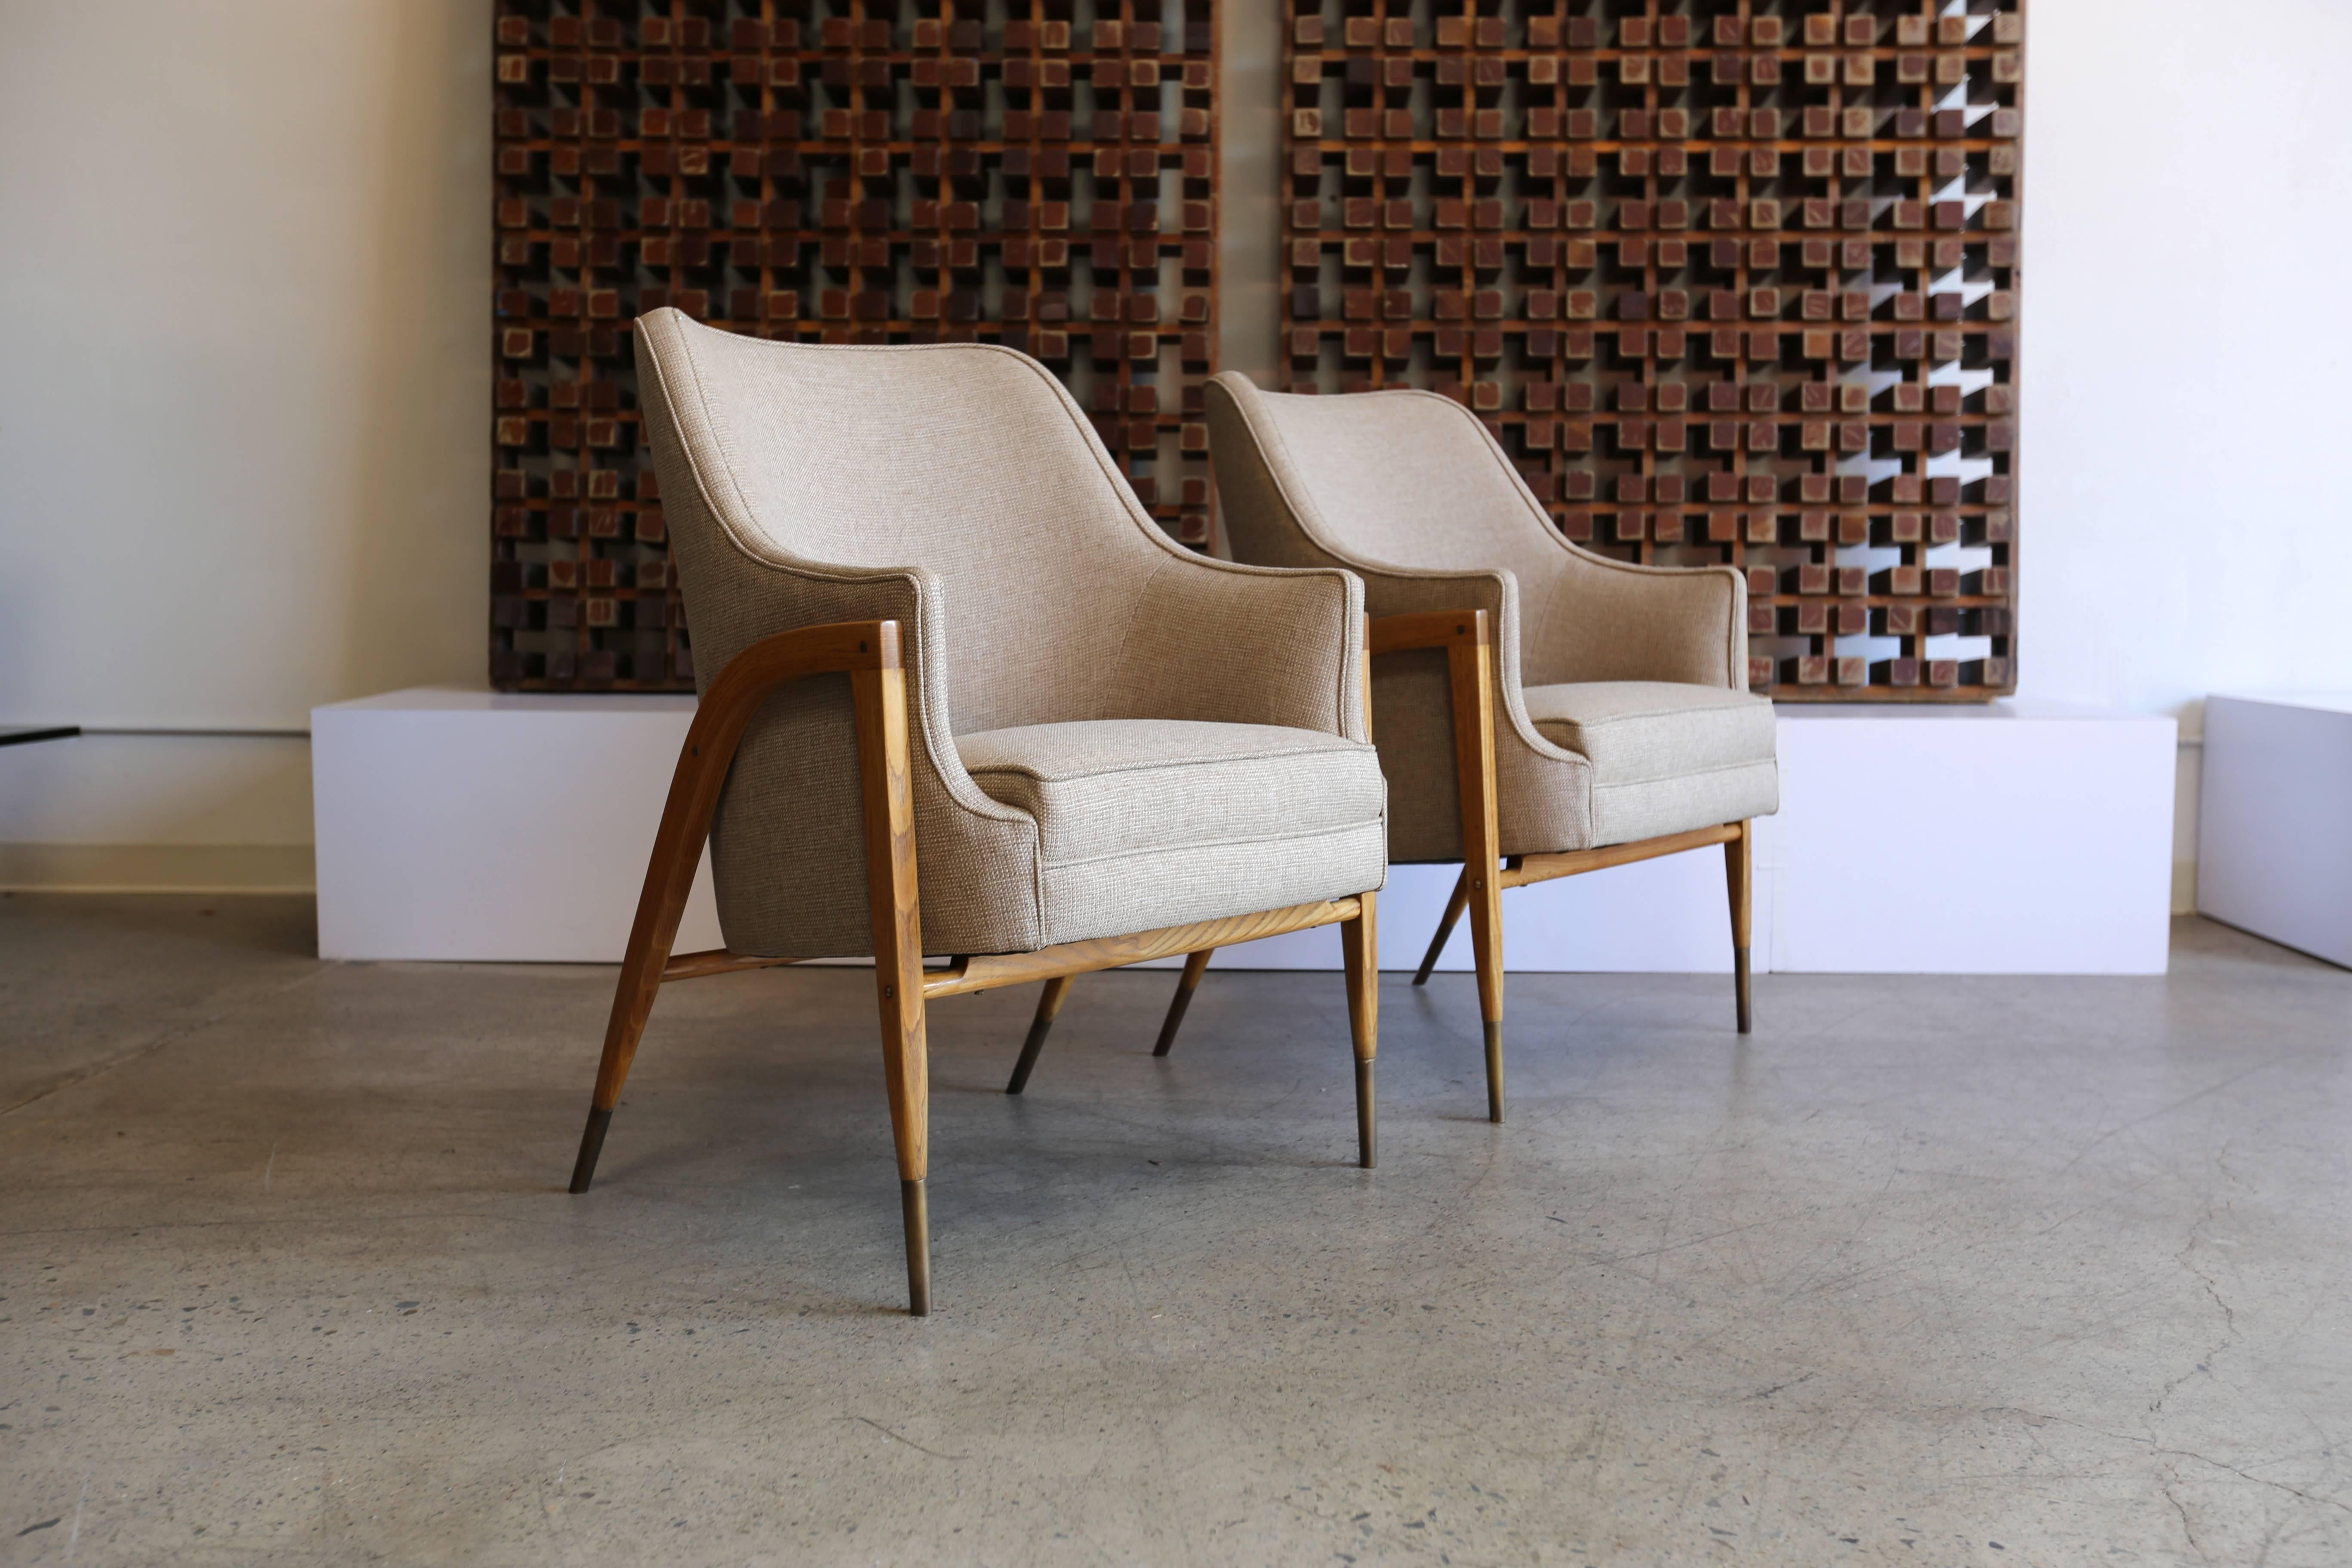 Rare pair of model # 5510 armchairs by Edward Wormley for Dunbar.